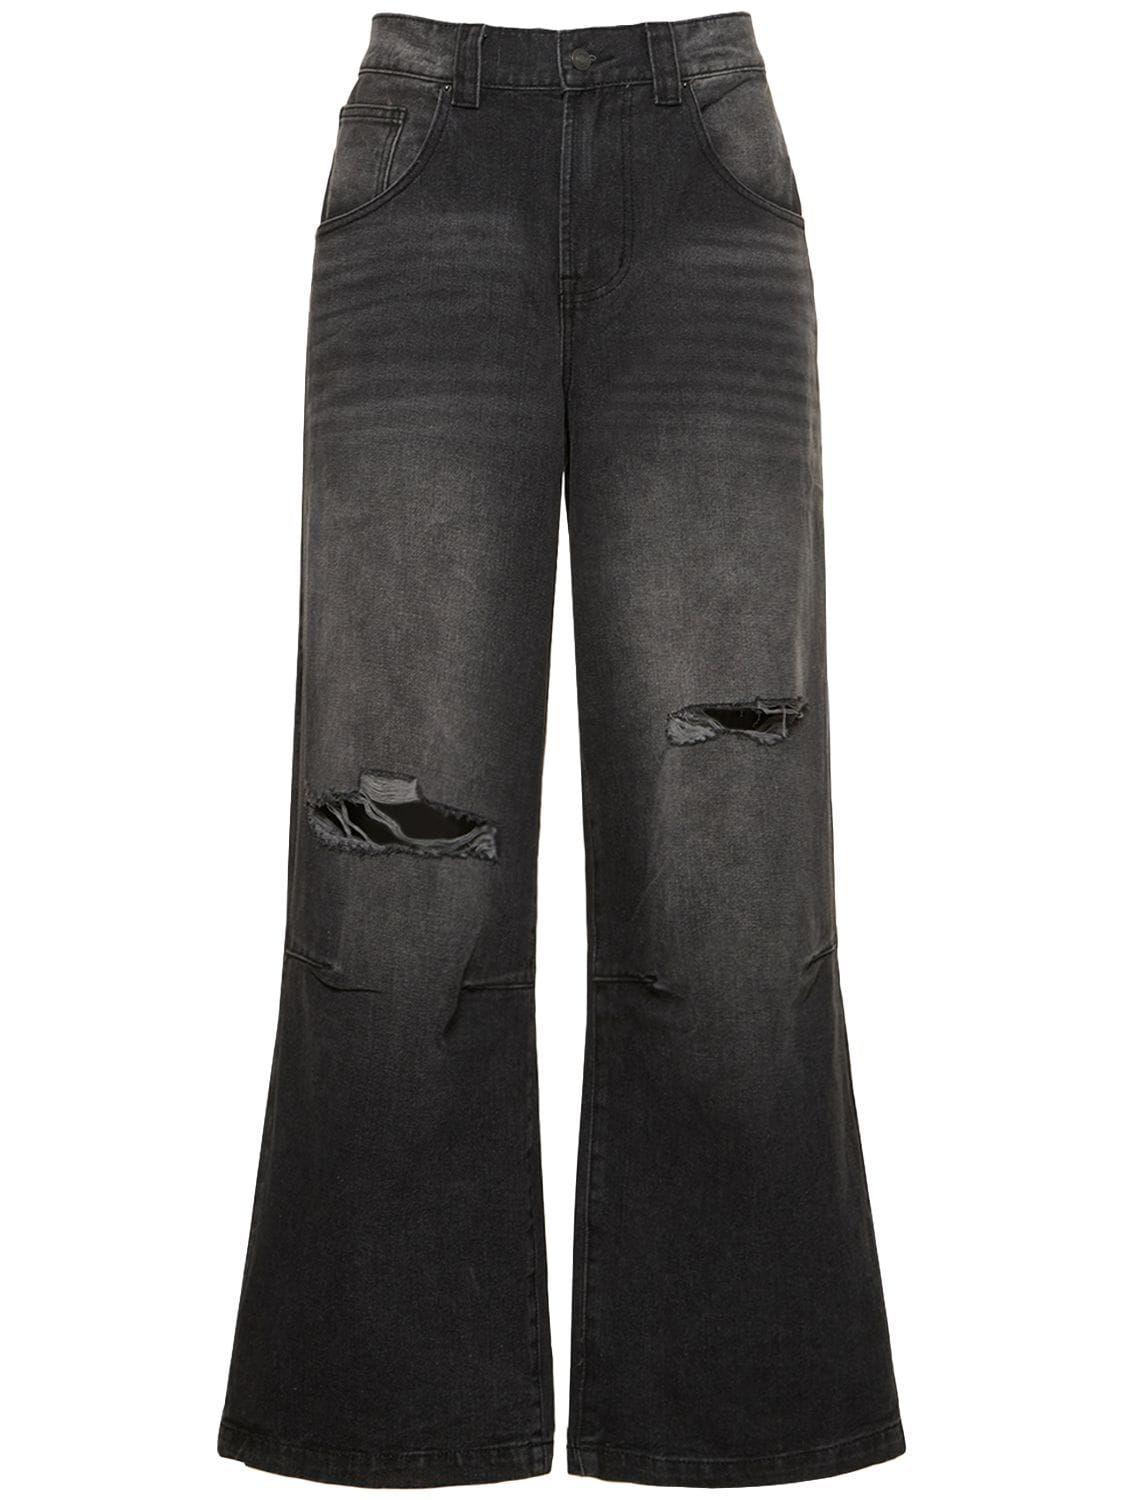 Jaded London Colossius Distressed Cotton Denim Jeans in Black for Men ...